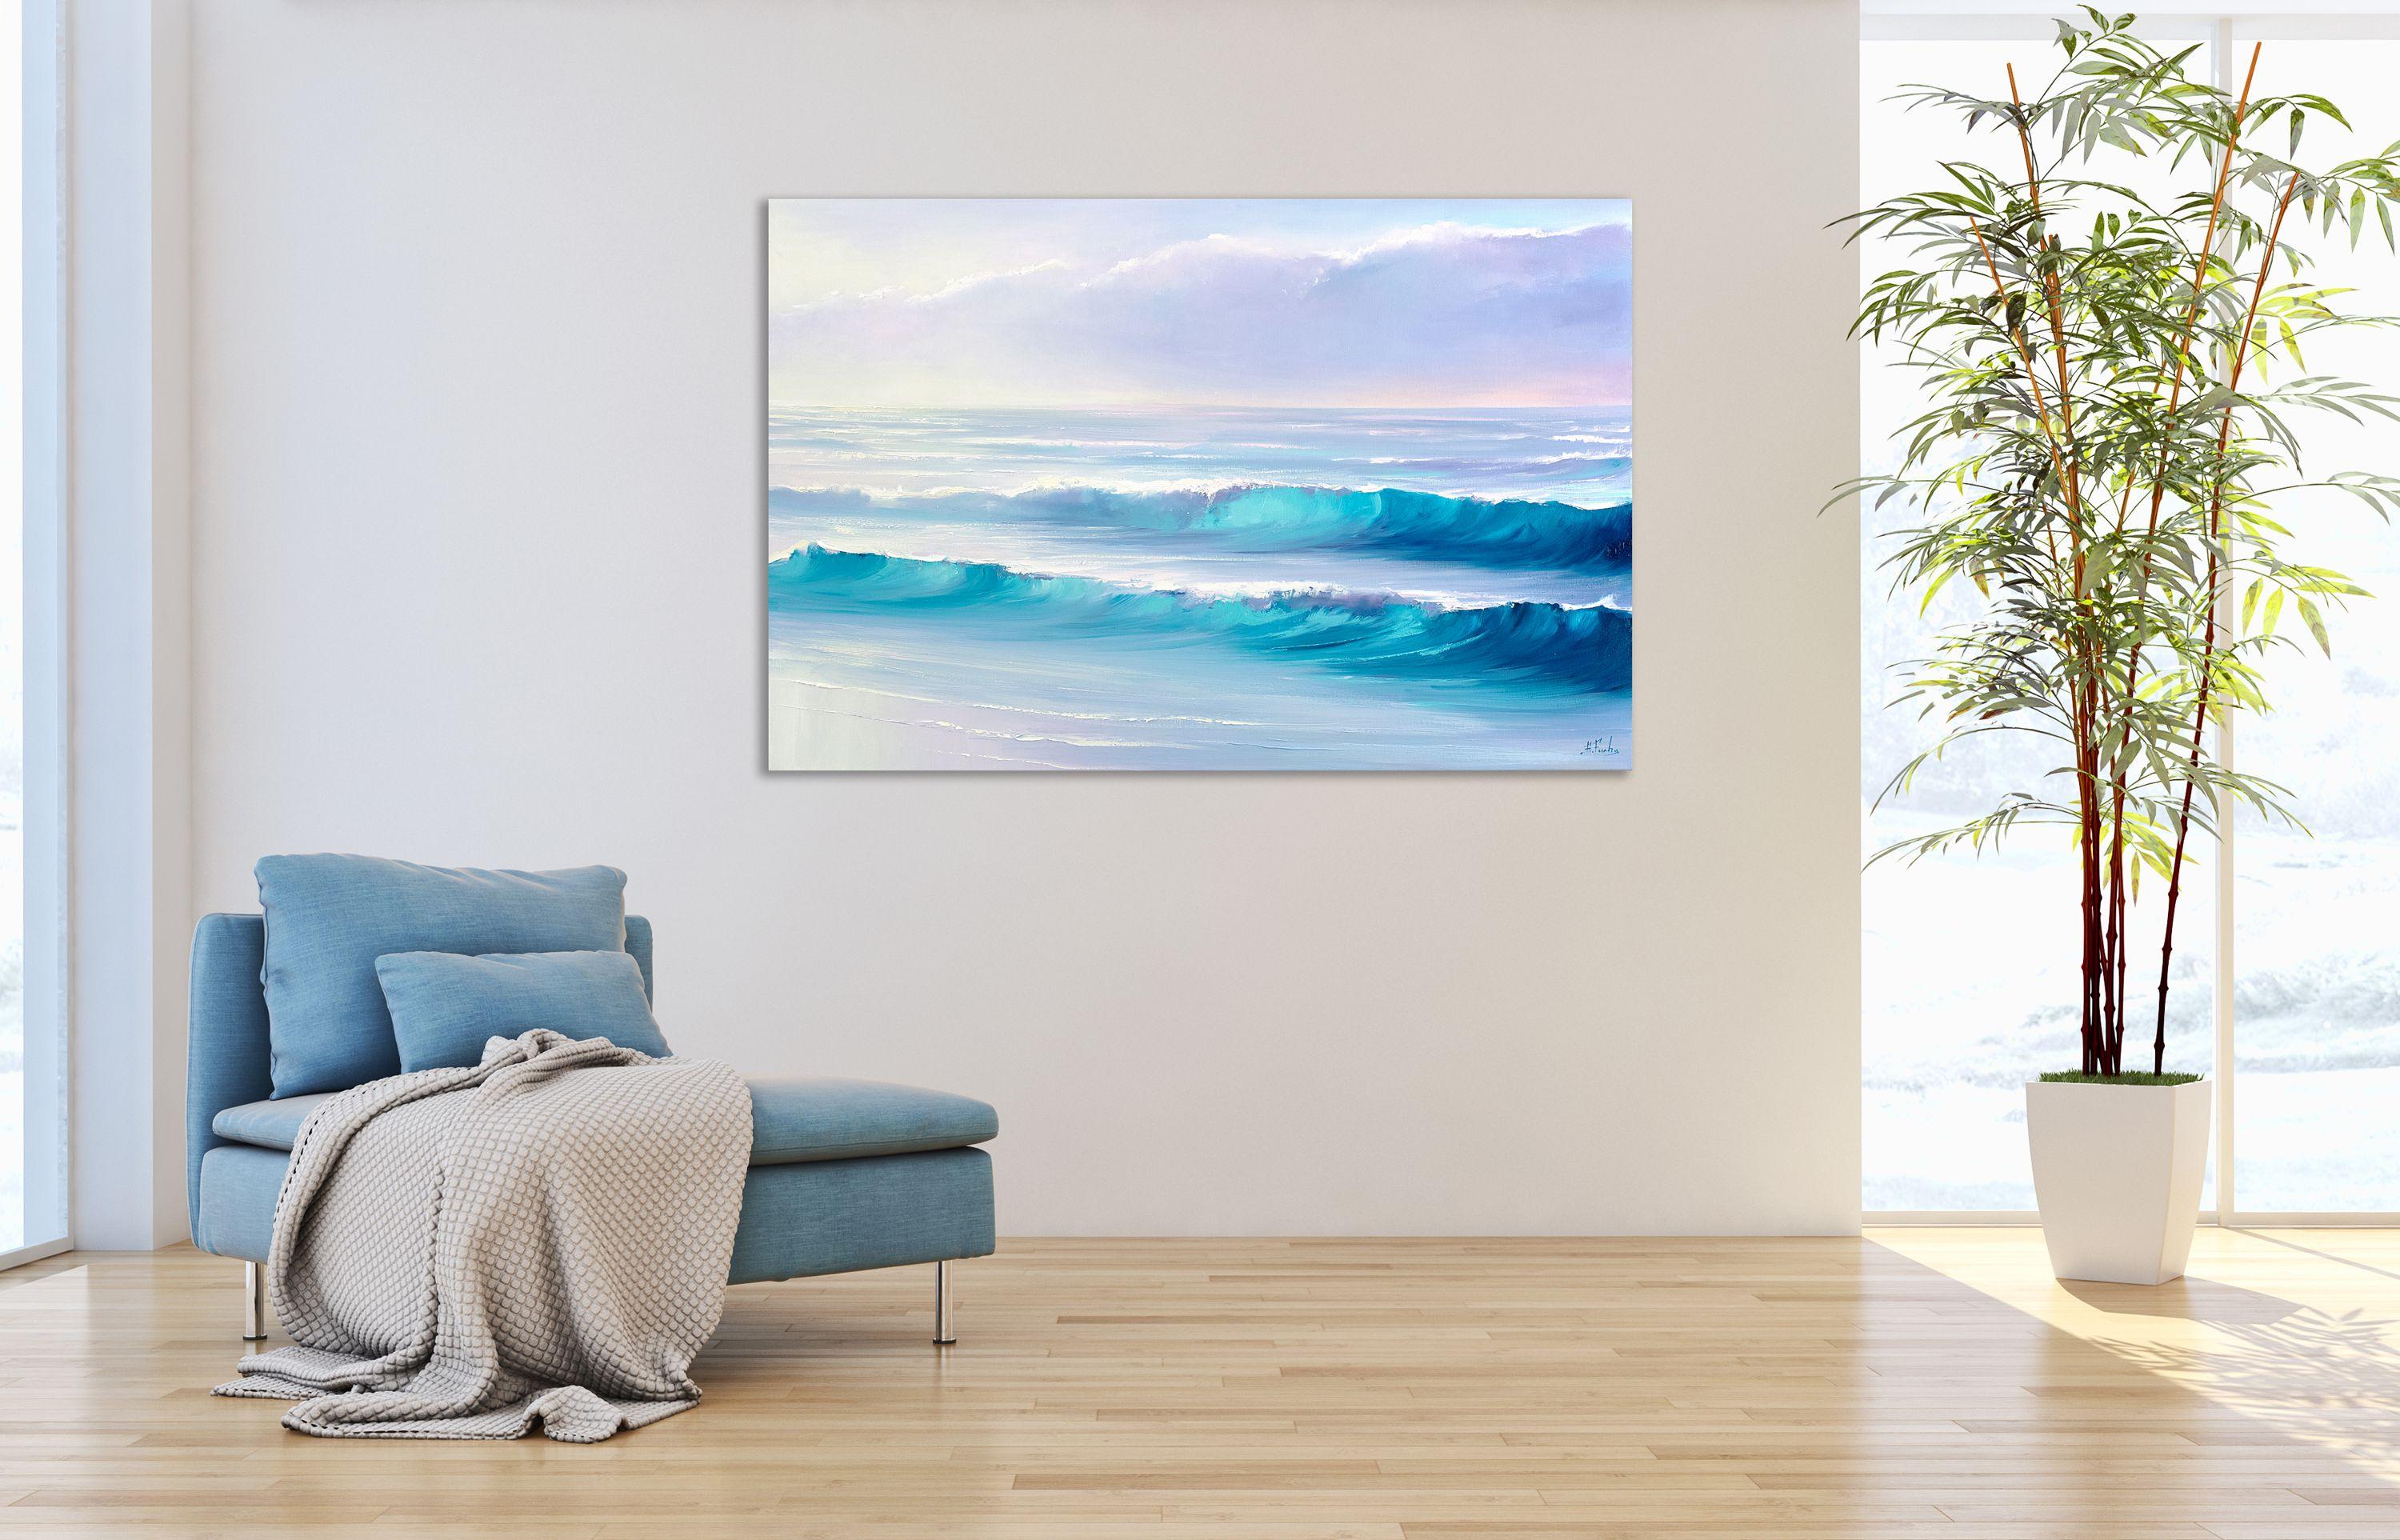 The Sound of the waves, Painting, Oil on Canvas 1